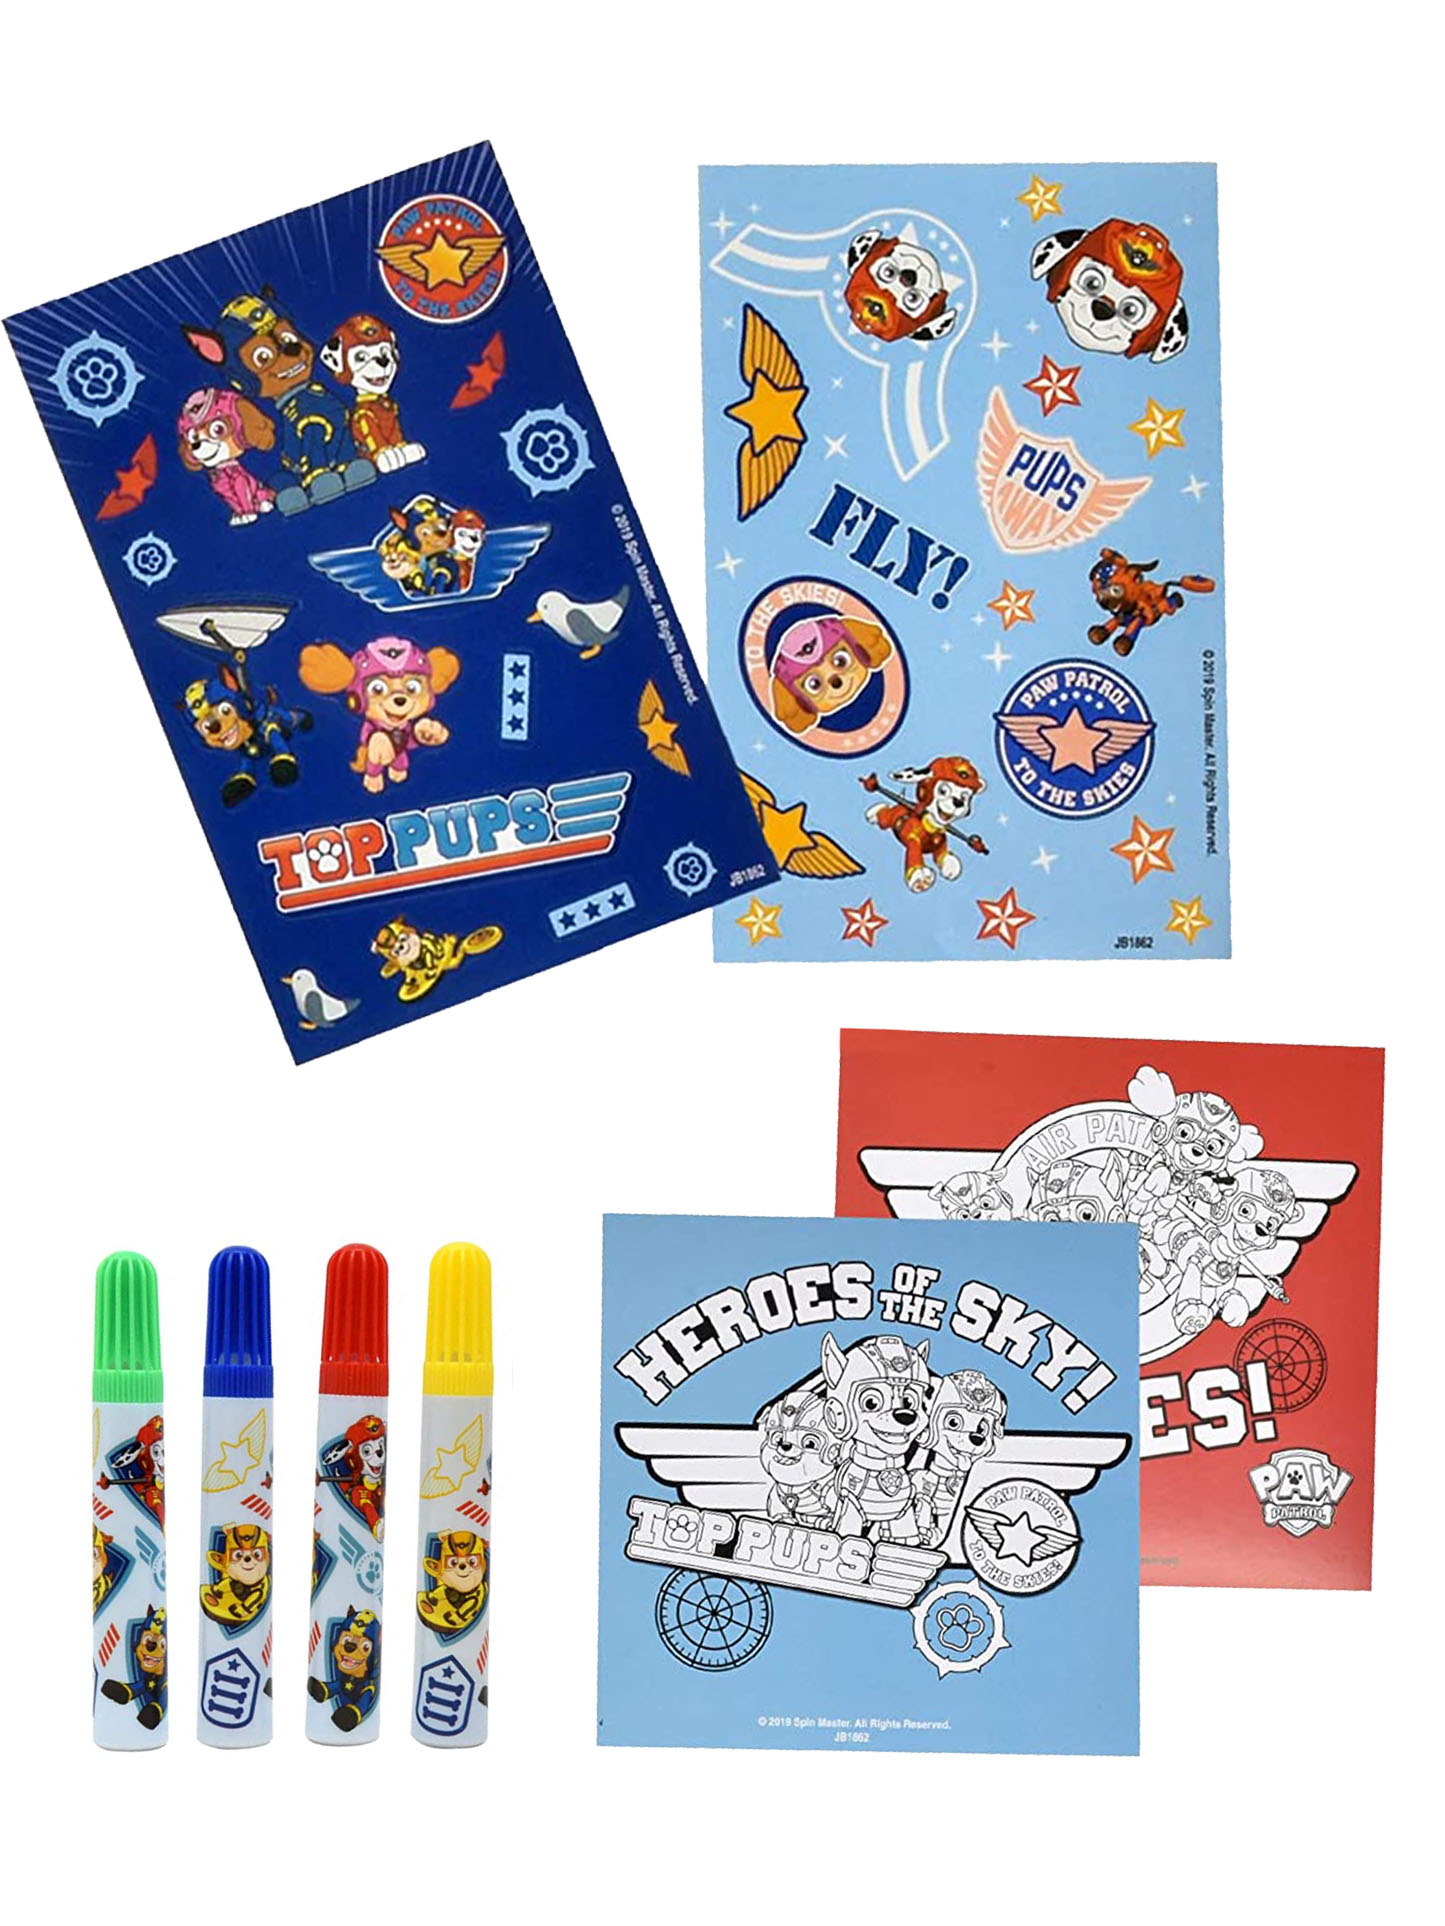 Paw Patrol Art Activity & Mini Backpack Set Markers Stickers Posters - image 2 of 4